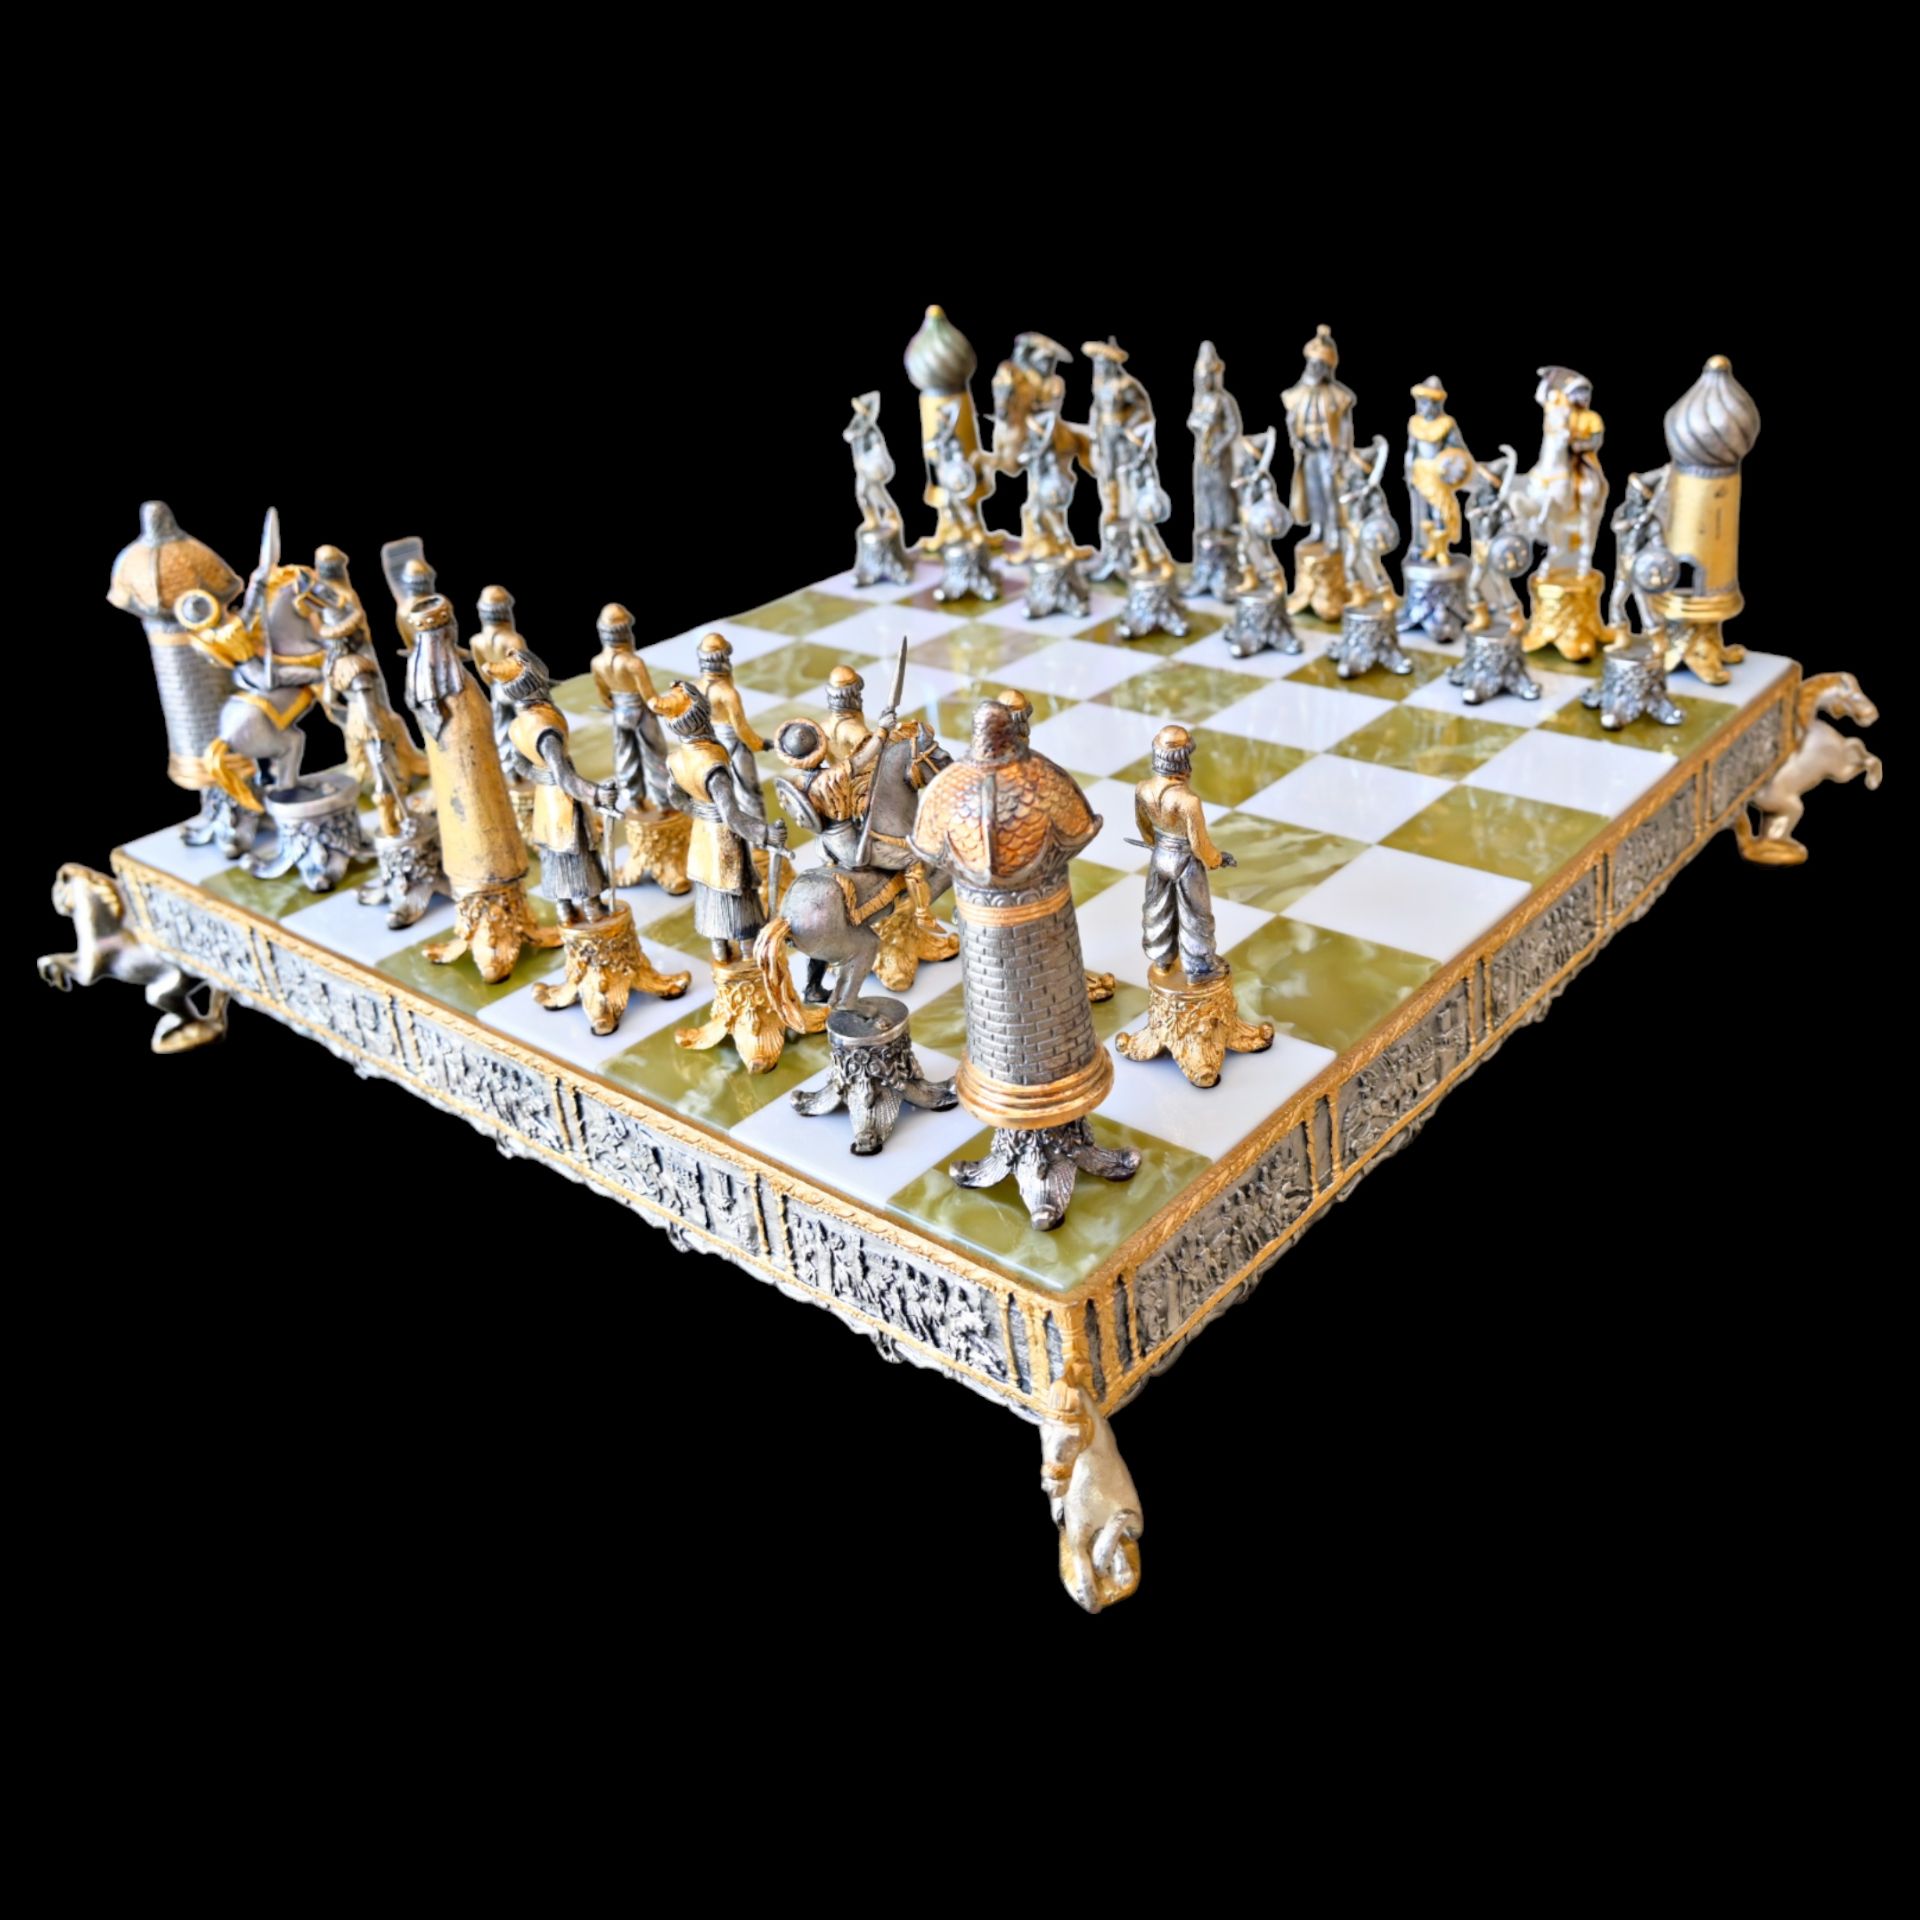 Piero Benzoni Onyx and Marble Silver-Plated and Gilt Bronze Chess Set, 70-80 years of the 20th _. - Bild 2 aus 13